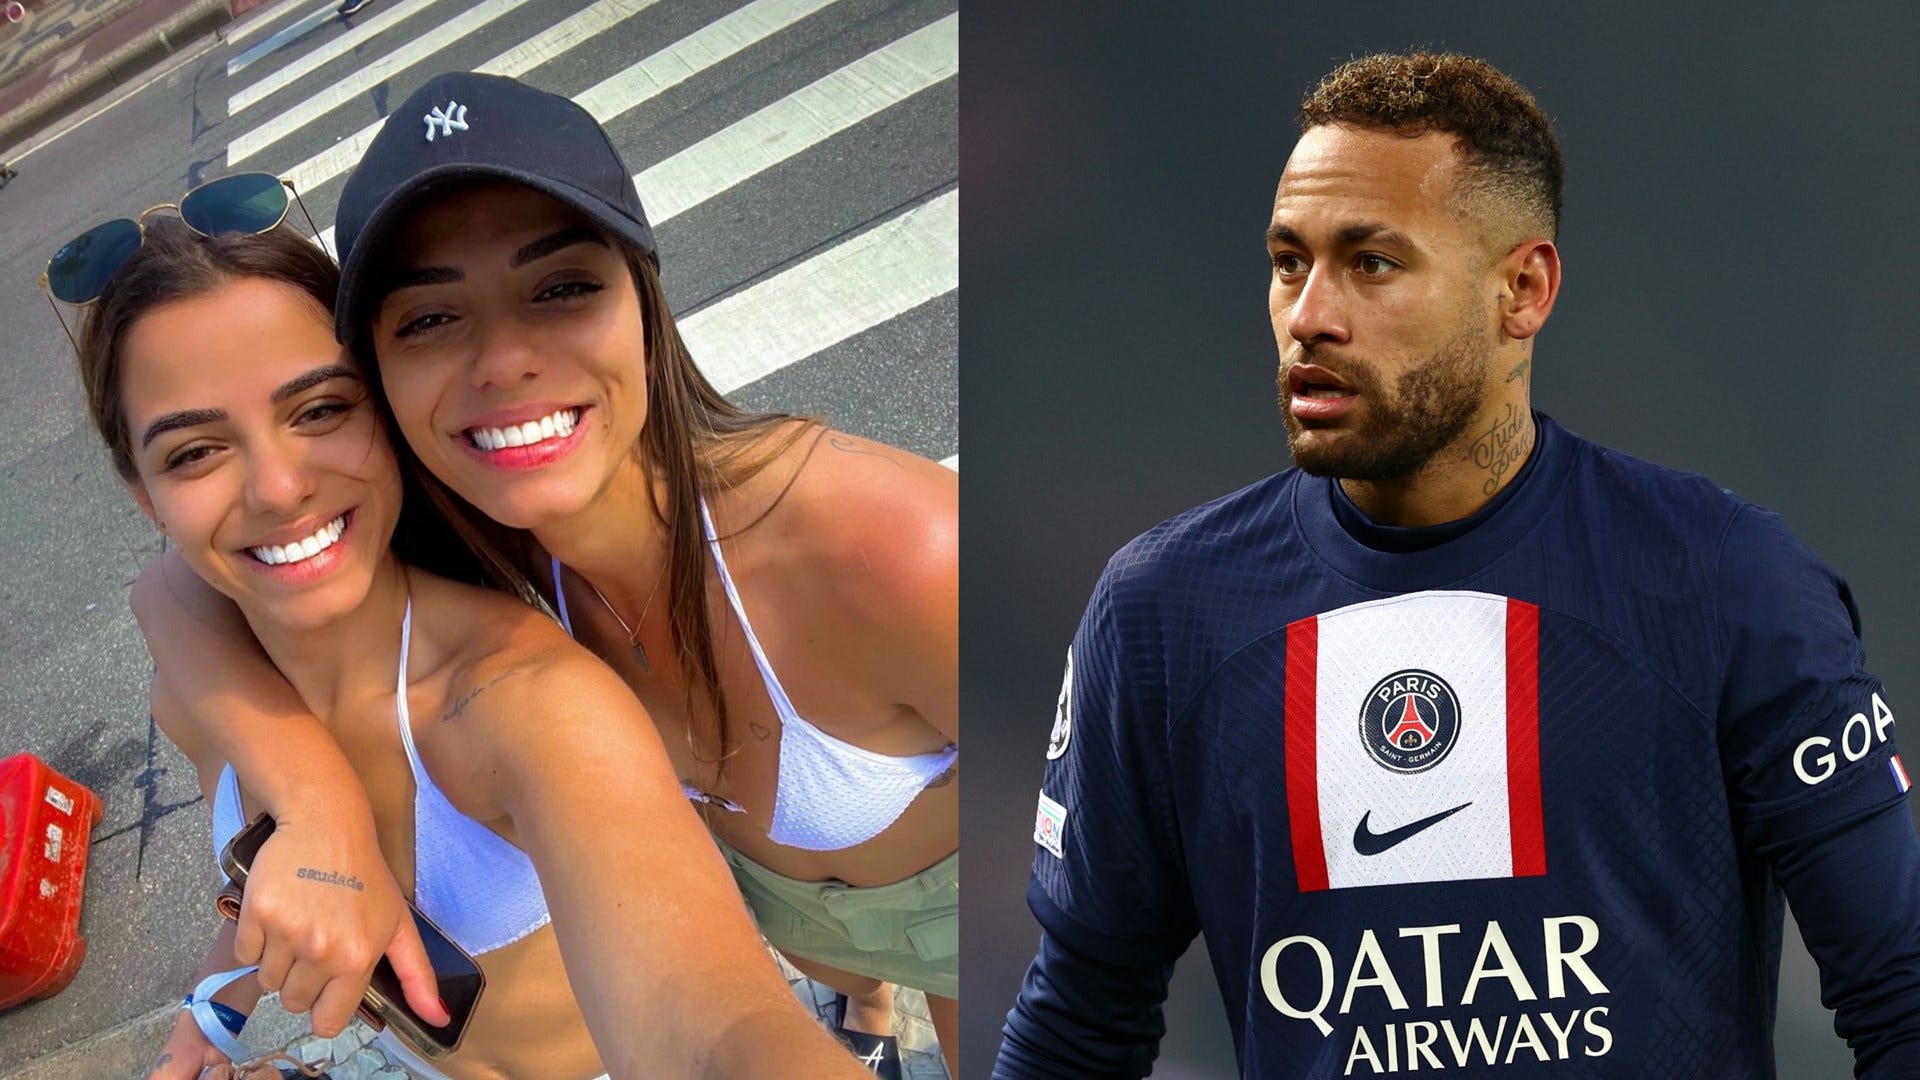 Neymar asked for sex with both of pic